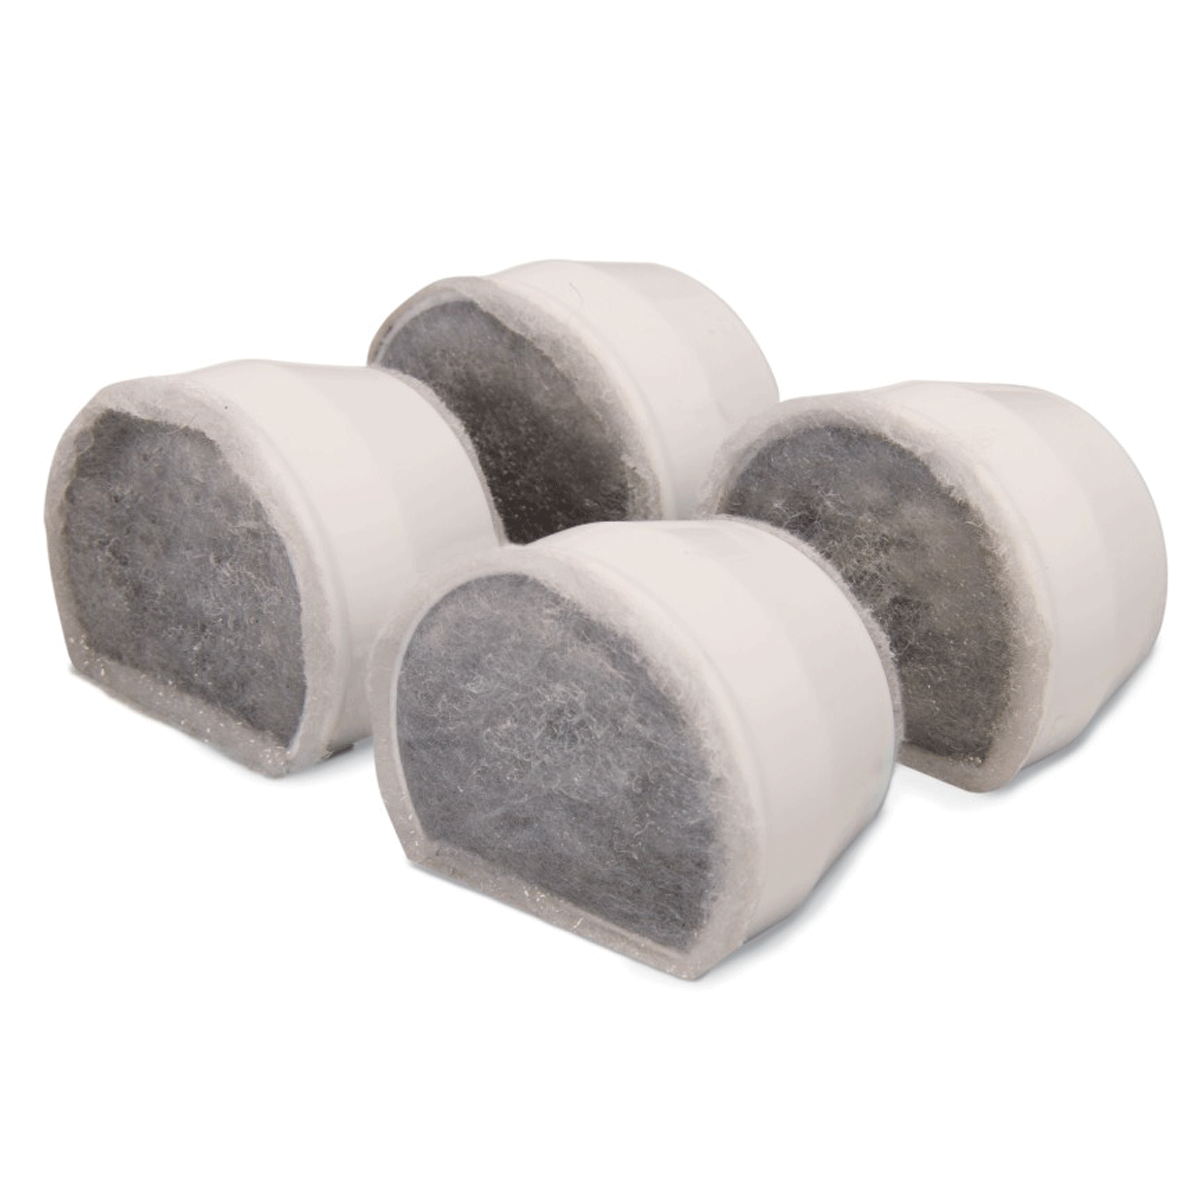 PetSafe Drinkwell Ceramic Fountains Replacement Charcoal Filters (4 pcs.)